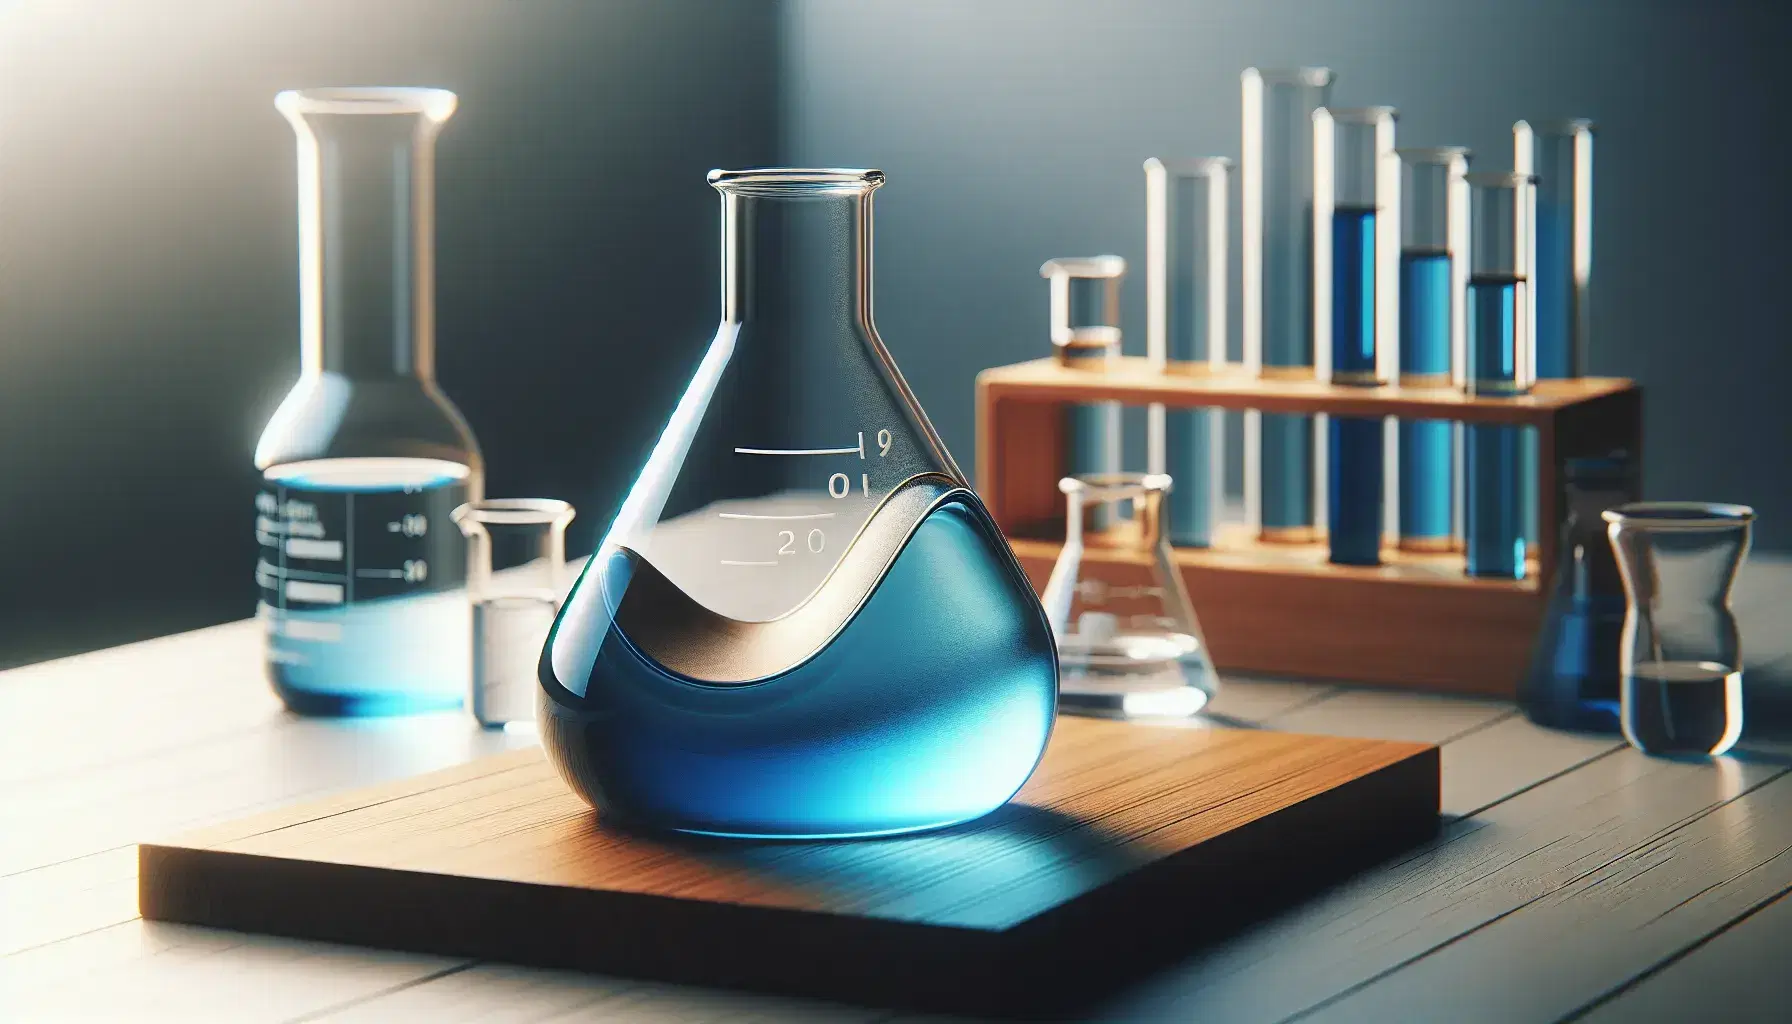 Glass flask in the shape of a Gauss curve with blue gradient liquid on wooden surface, illuminated on the left, with blurred glassware in the gray background.